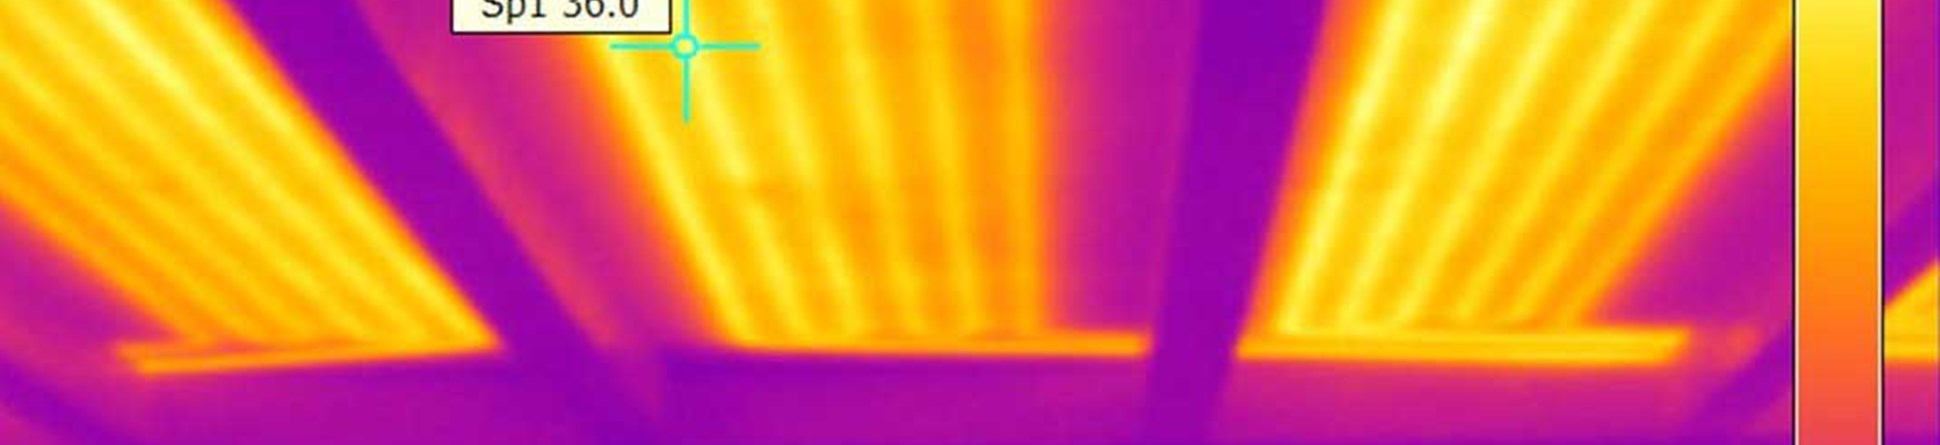 A thermal image of part of the ceiling at Eltham Palace, different colours are used to show varying areas of heat.